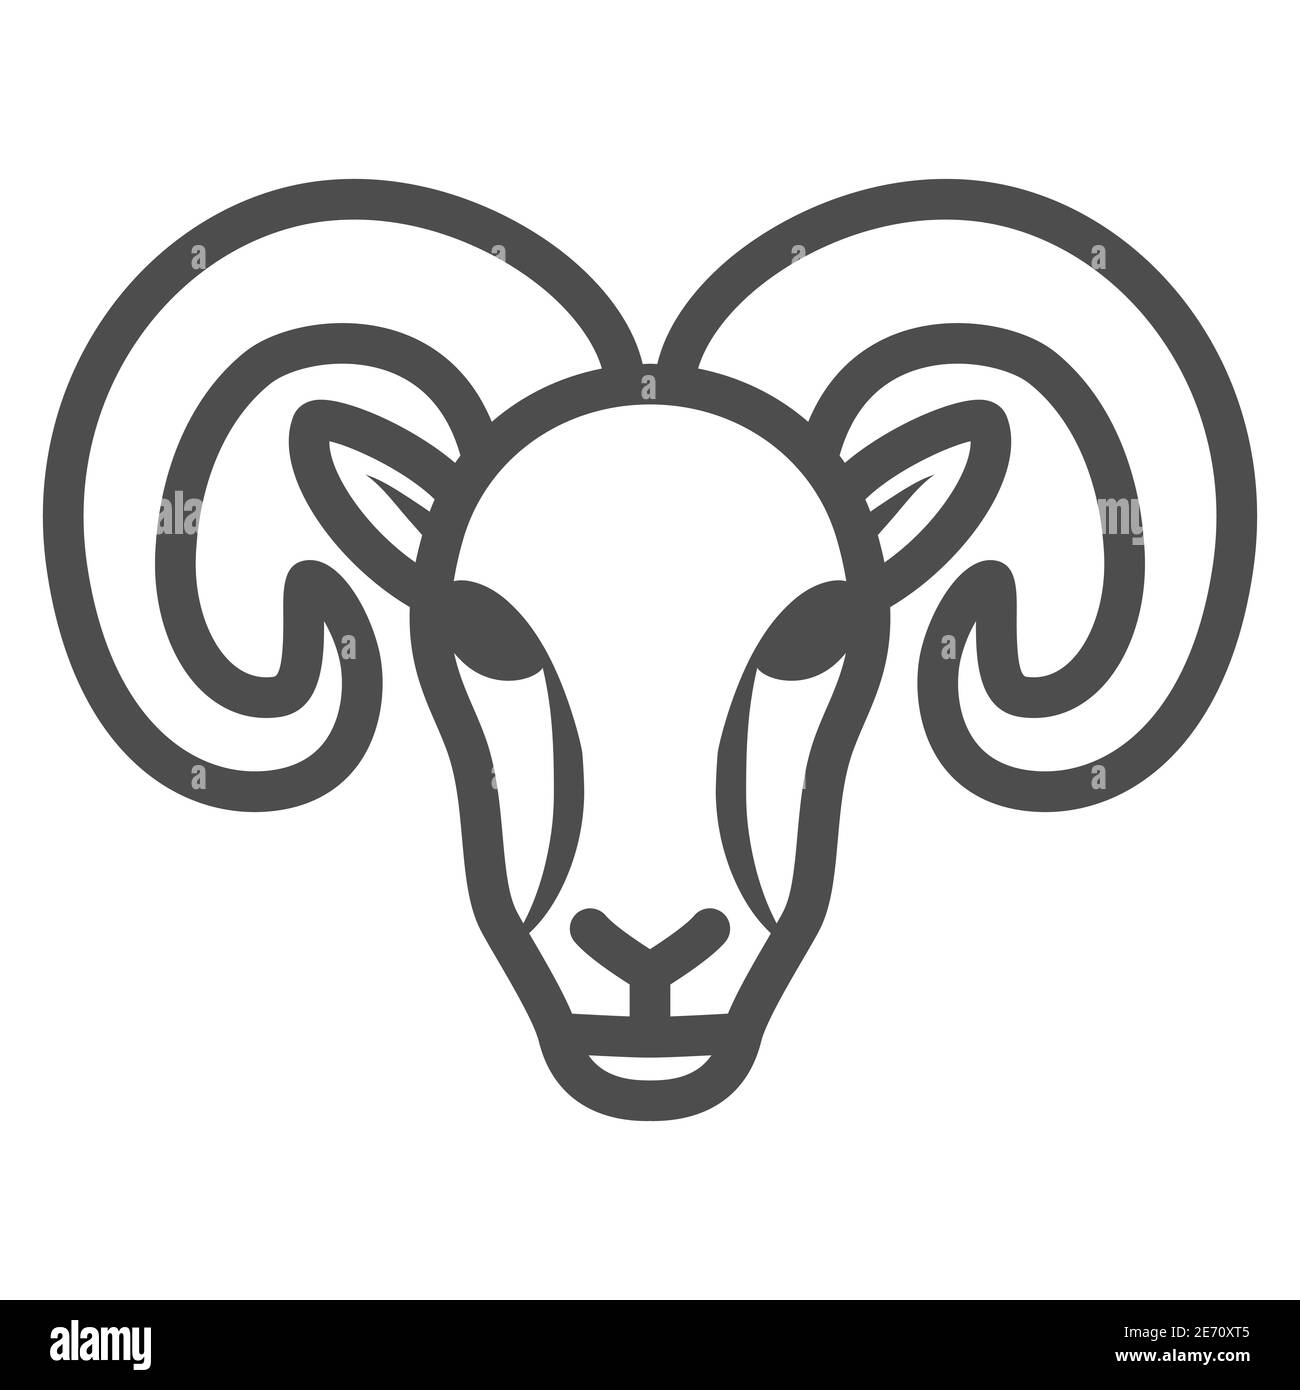 Ram line icon, Farm animals concept, sheep sign on white background ...